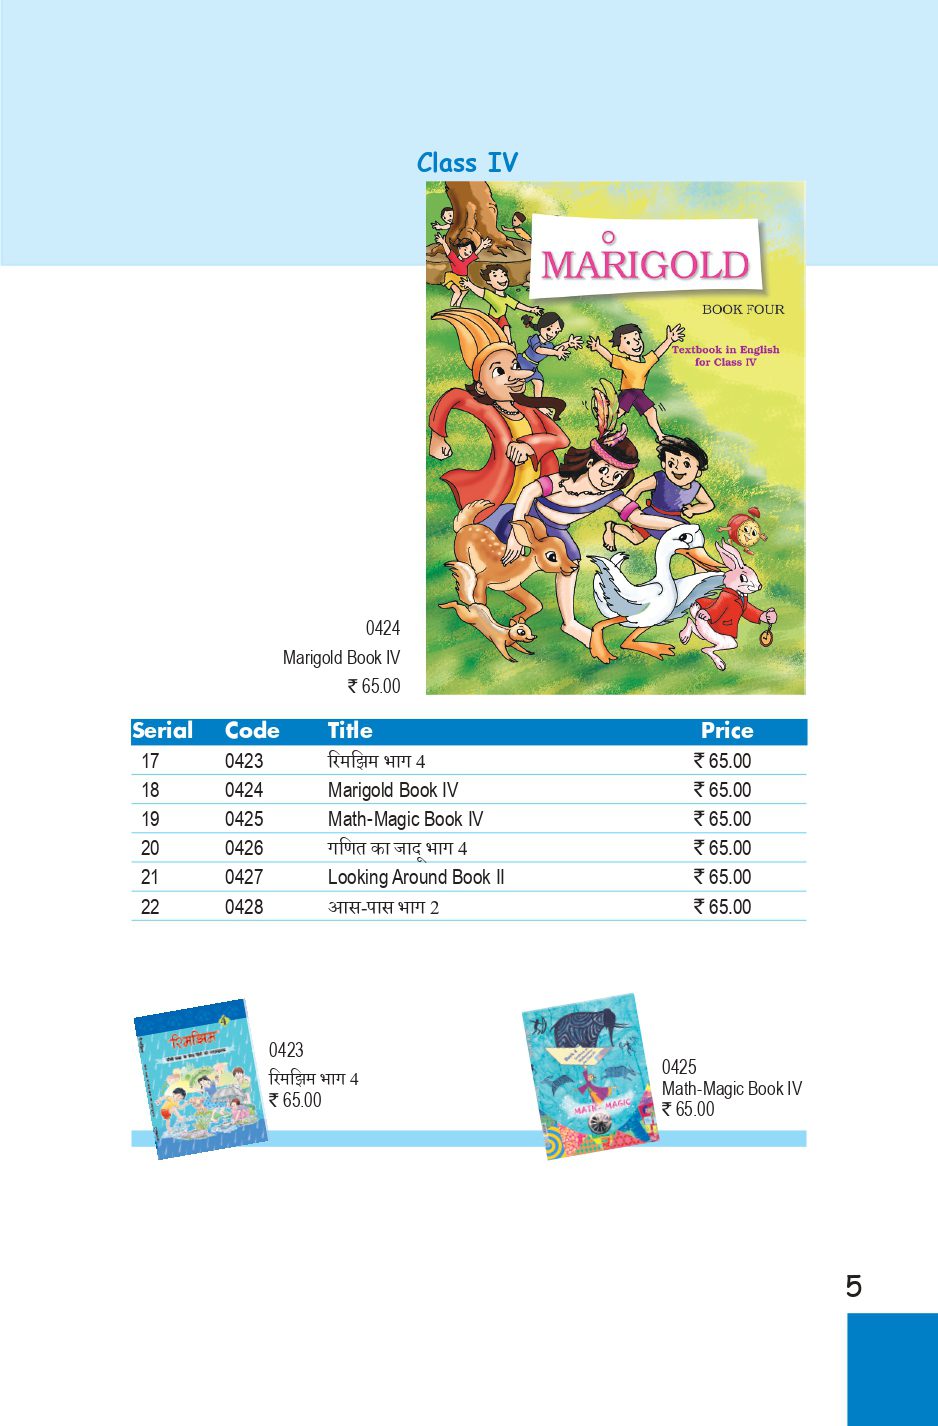 List of NCERT Text Books Classes 1, 2, 3, 4, 5, 6, 7, 8, 9, 10, 11, 12 with Cost Price